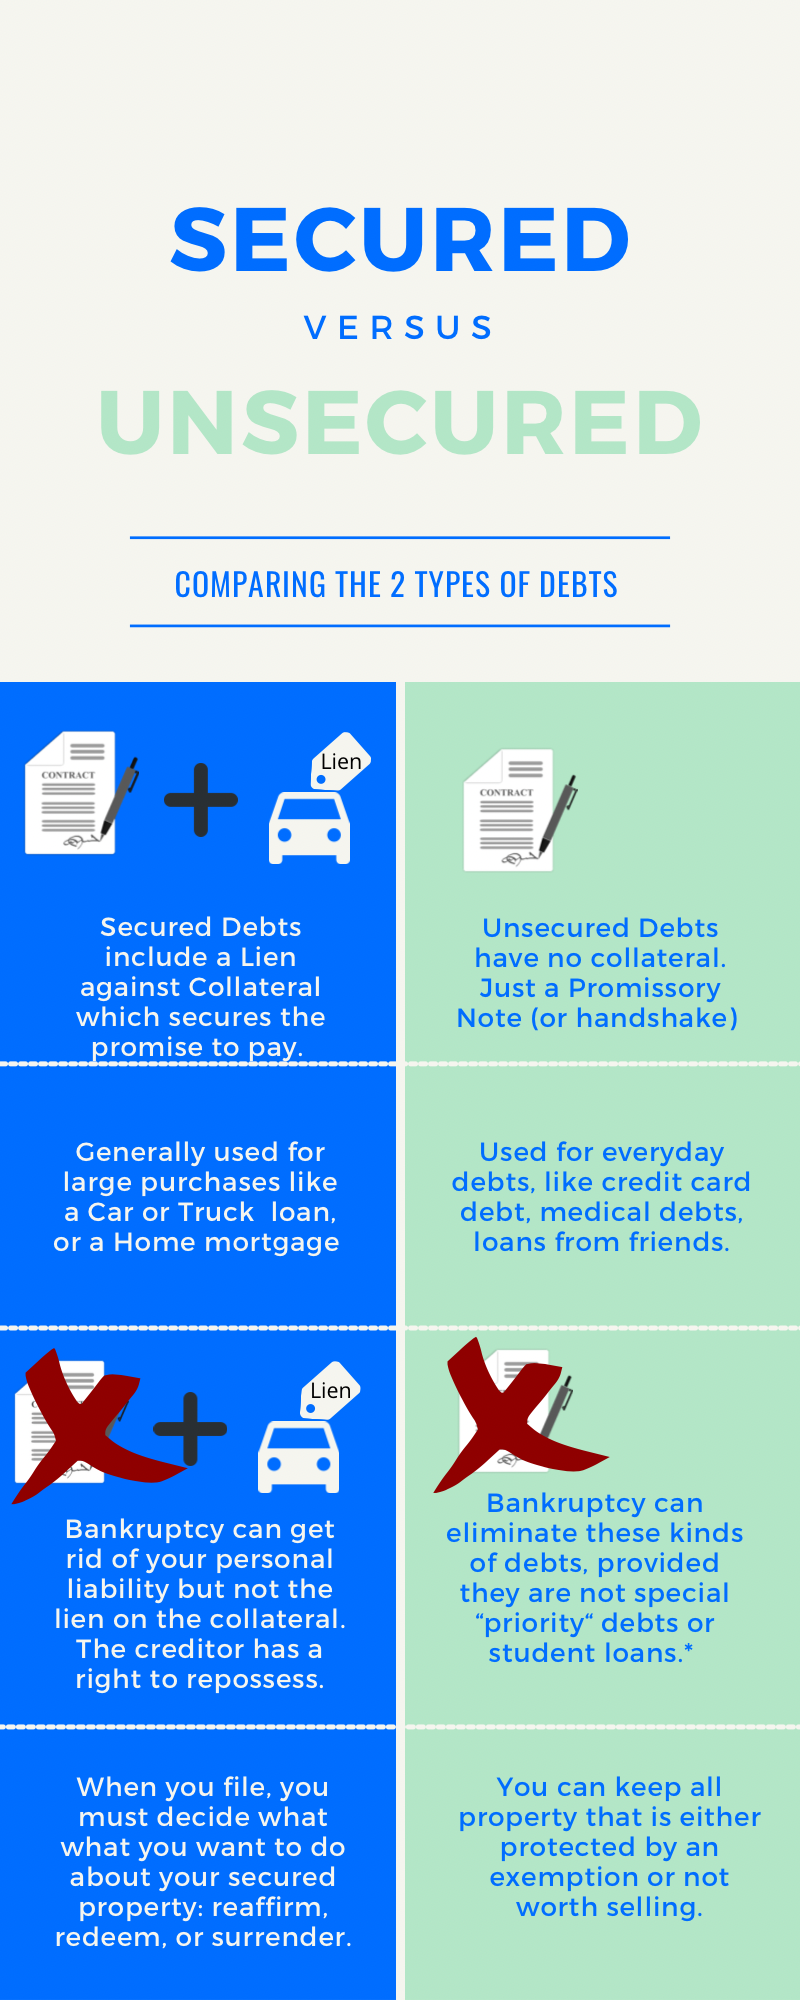 info graphic explaining secured versus unsecured debts in bankruptcy